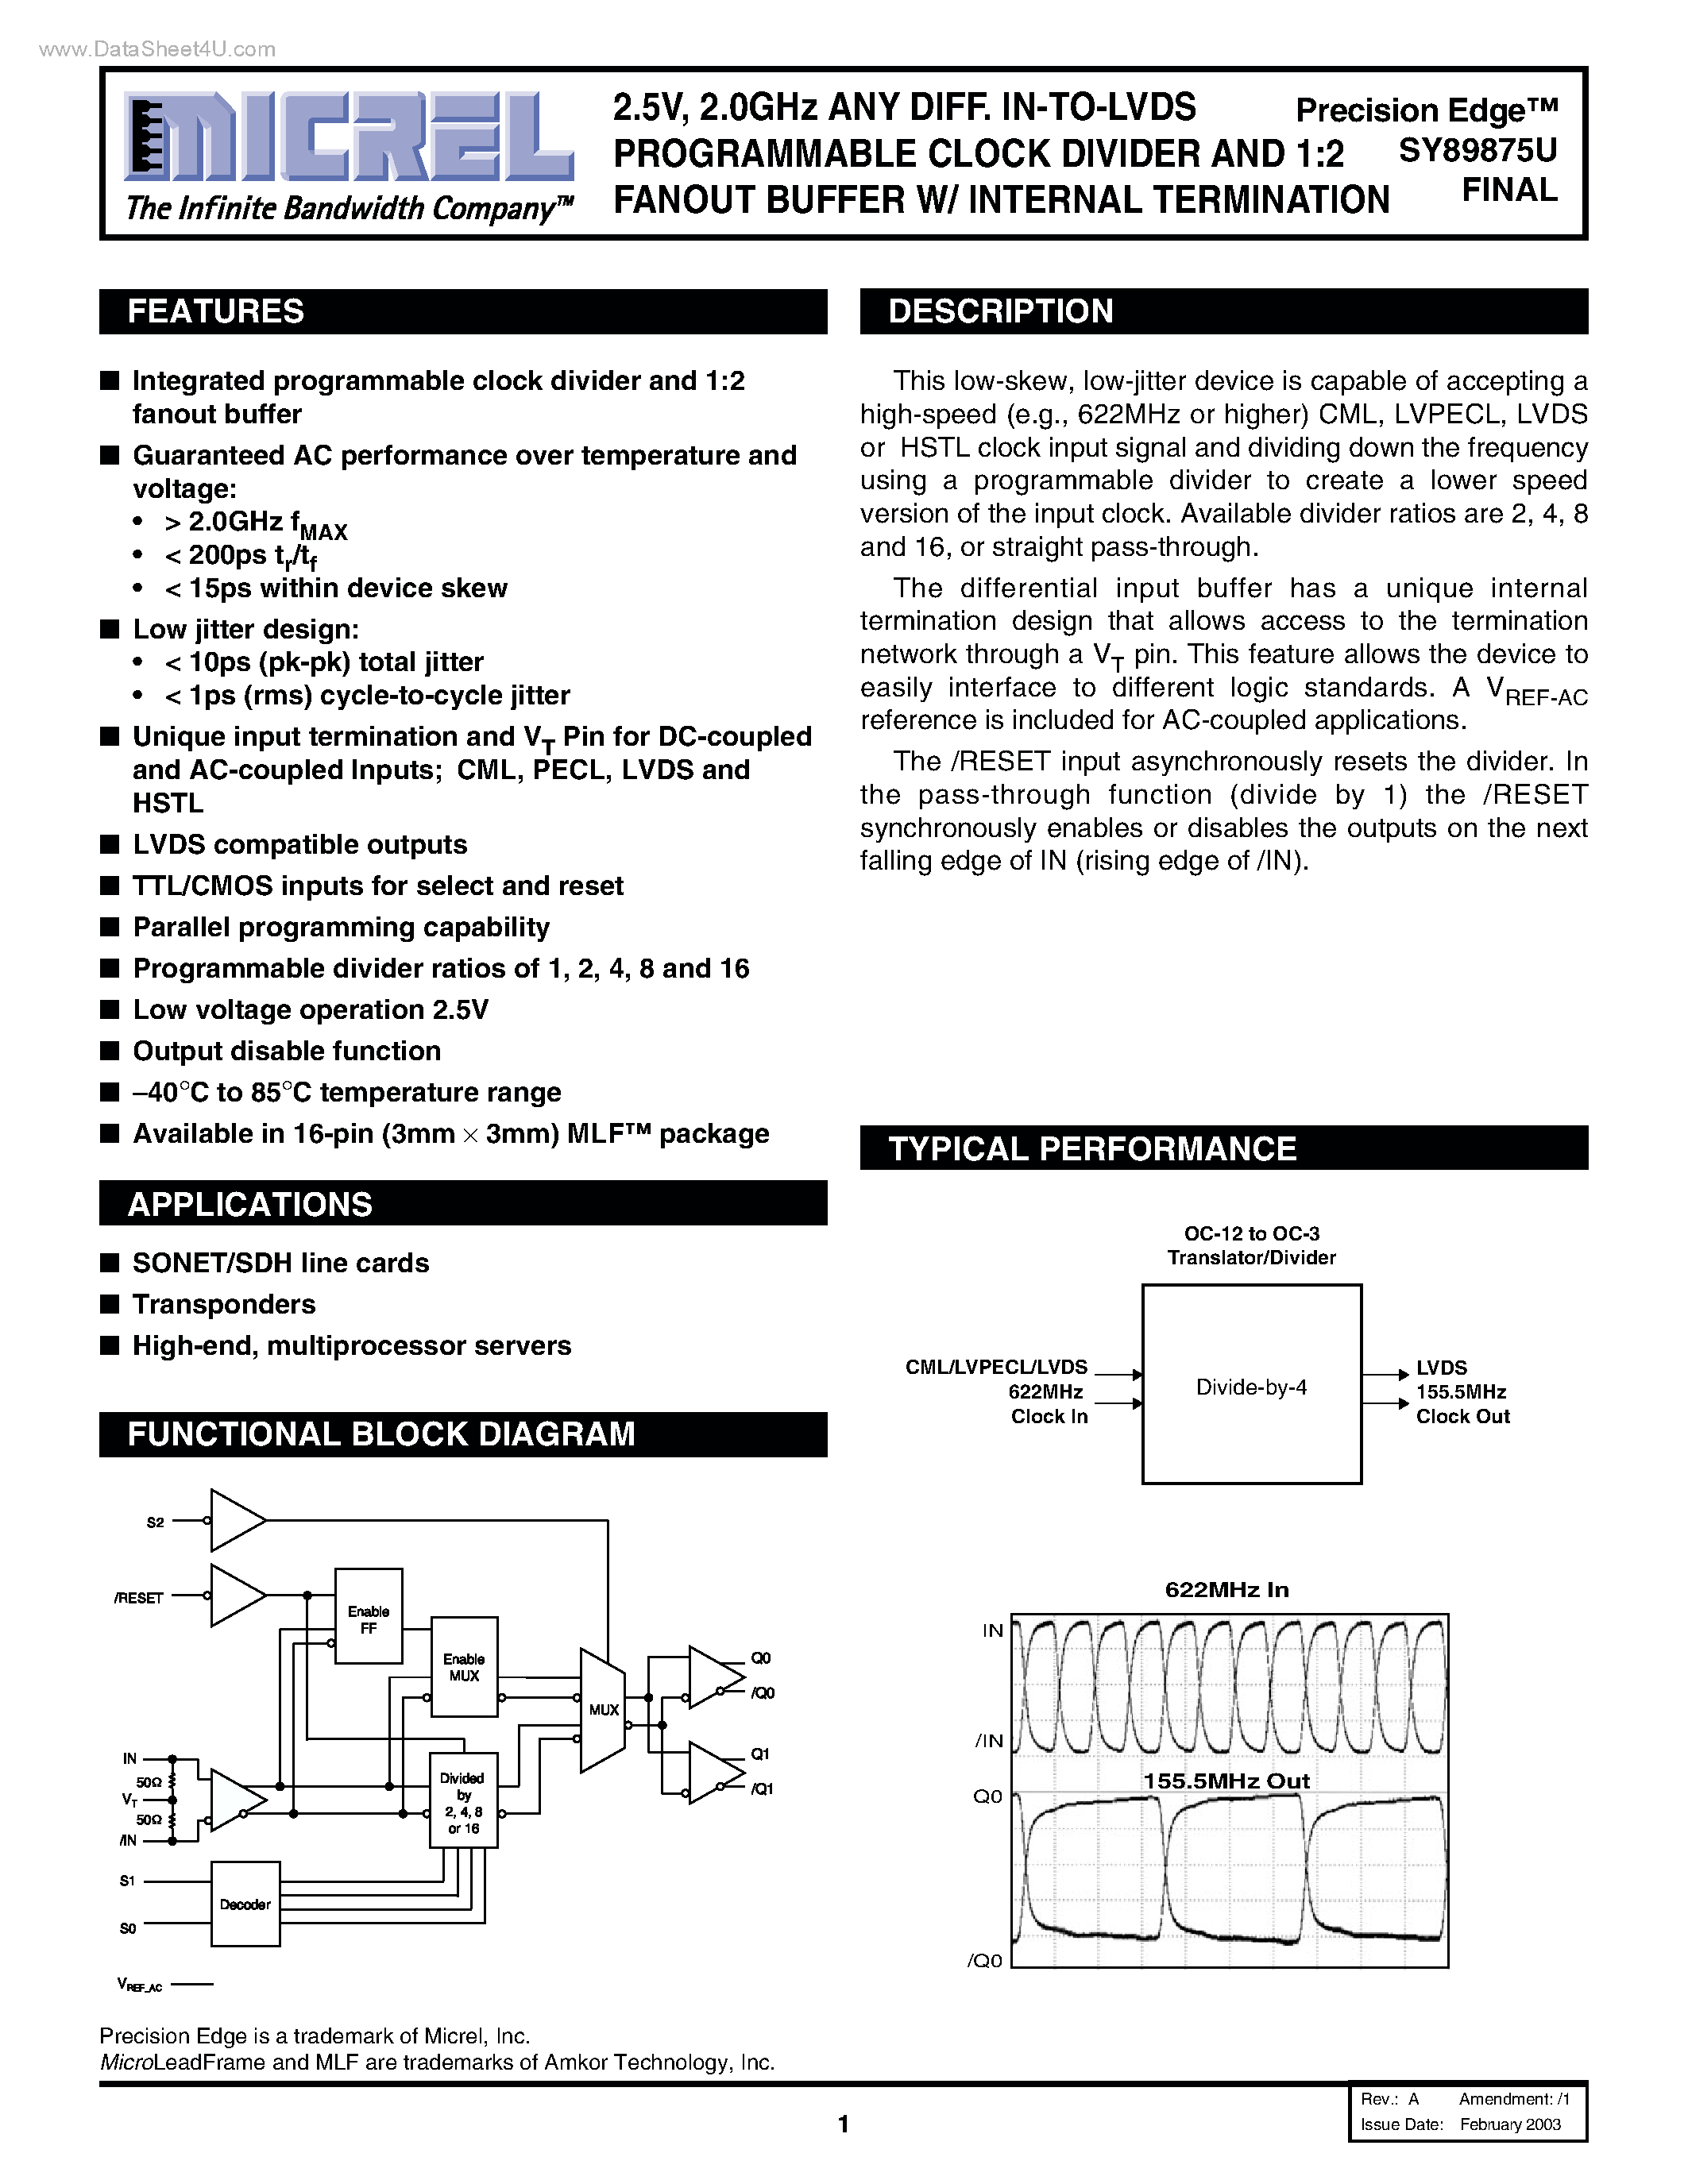 Datasheet SY89875U - IN-TO-LVDS PROGRAMMABLE CLOCK DIVIDER AND 1:2 FANOUT BUFFER W/ INTERNAL TERMINATION page 1